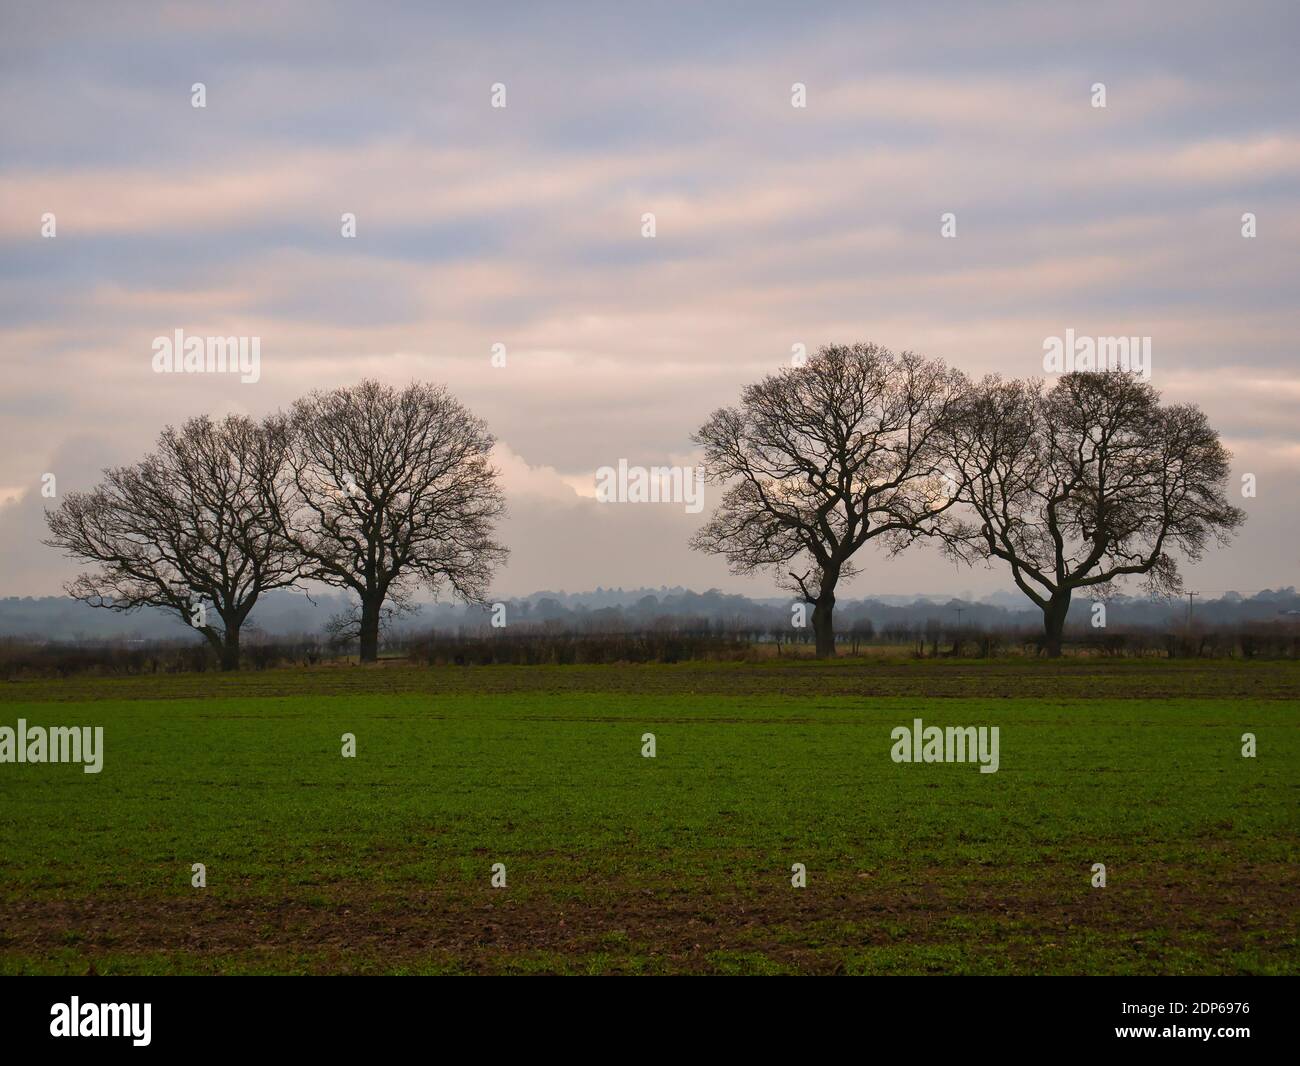 Arable farmland and silhouetted leafless trees at dusk at the end of a cold winter day with mist forming. Taken in Cheshire, England, UK. Stock Photo